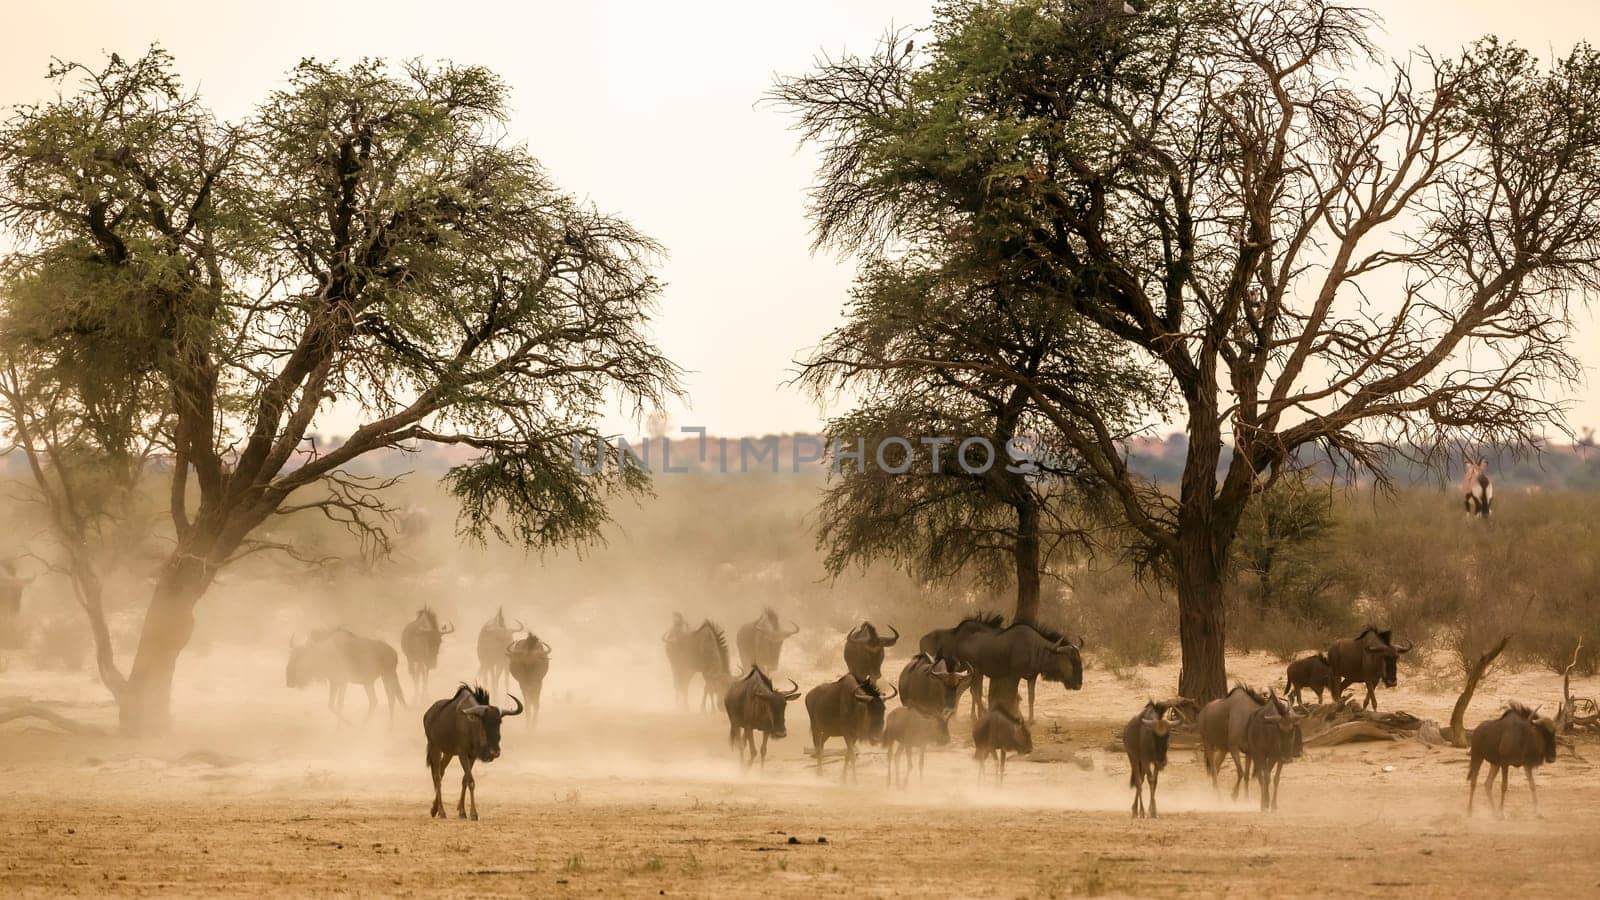 Herd of Blue wildebeest walking front view in sand dust in Kgalagadi transfrontier park, South Africa ; Specie Connochaetes taurinus family of Bovidae